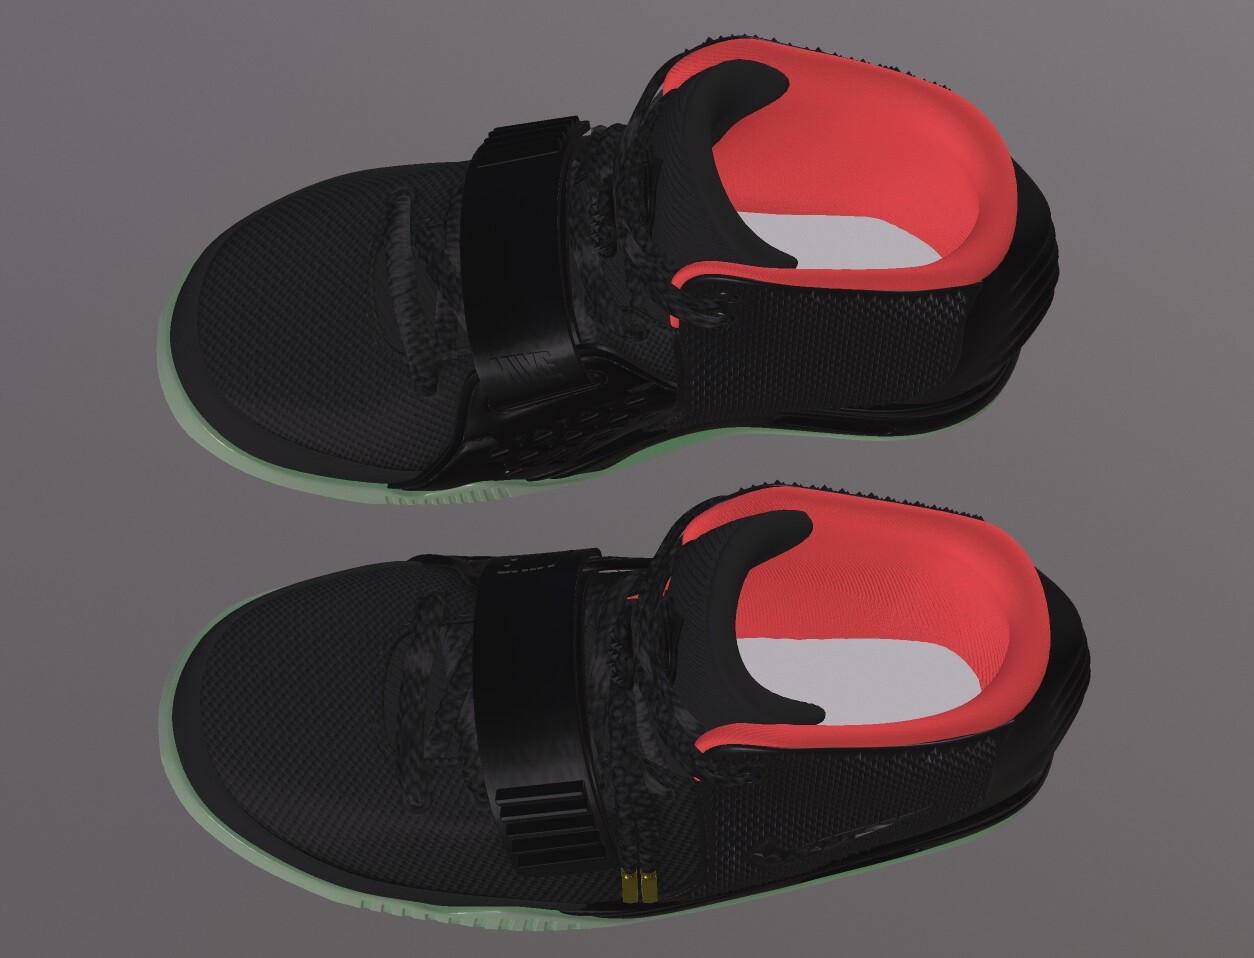 ArtStation - NIKE AIR YEEZY 2 SHOES low-poly PBR